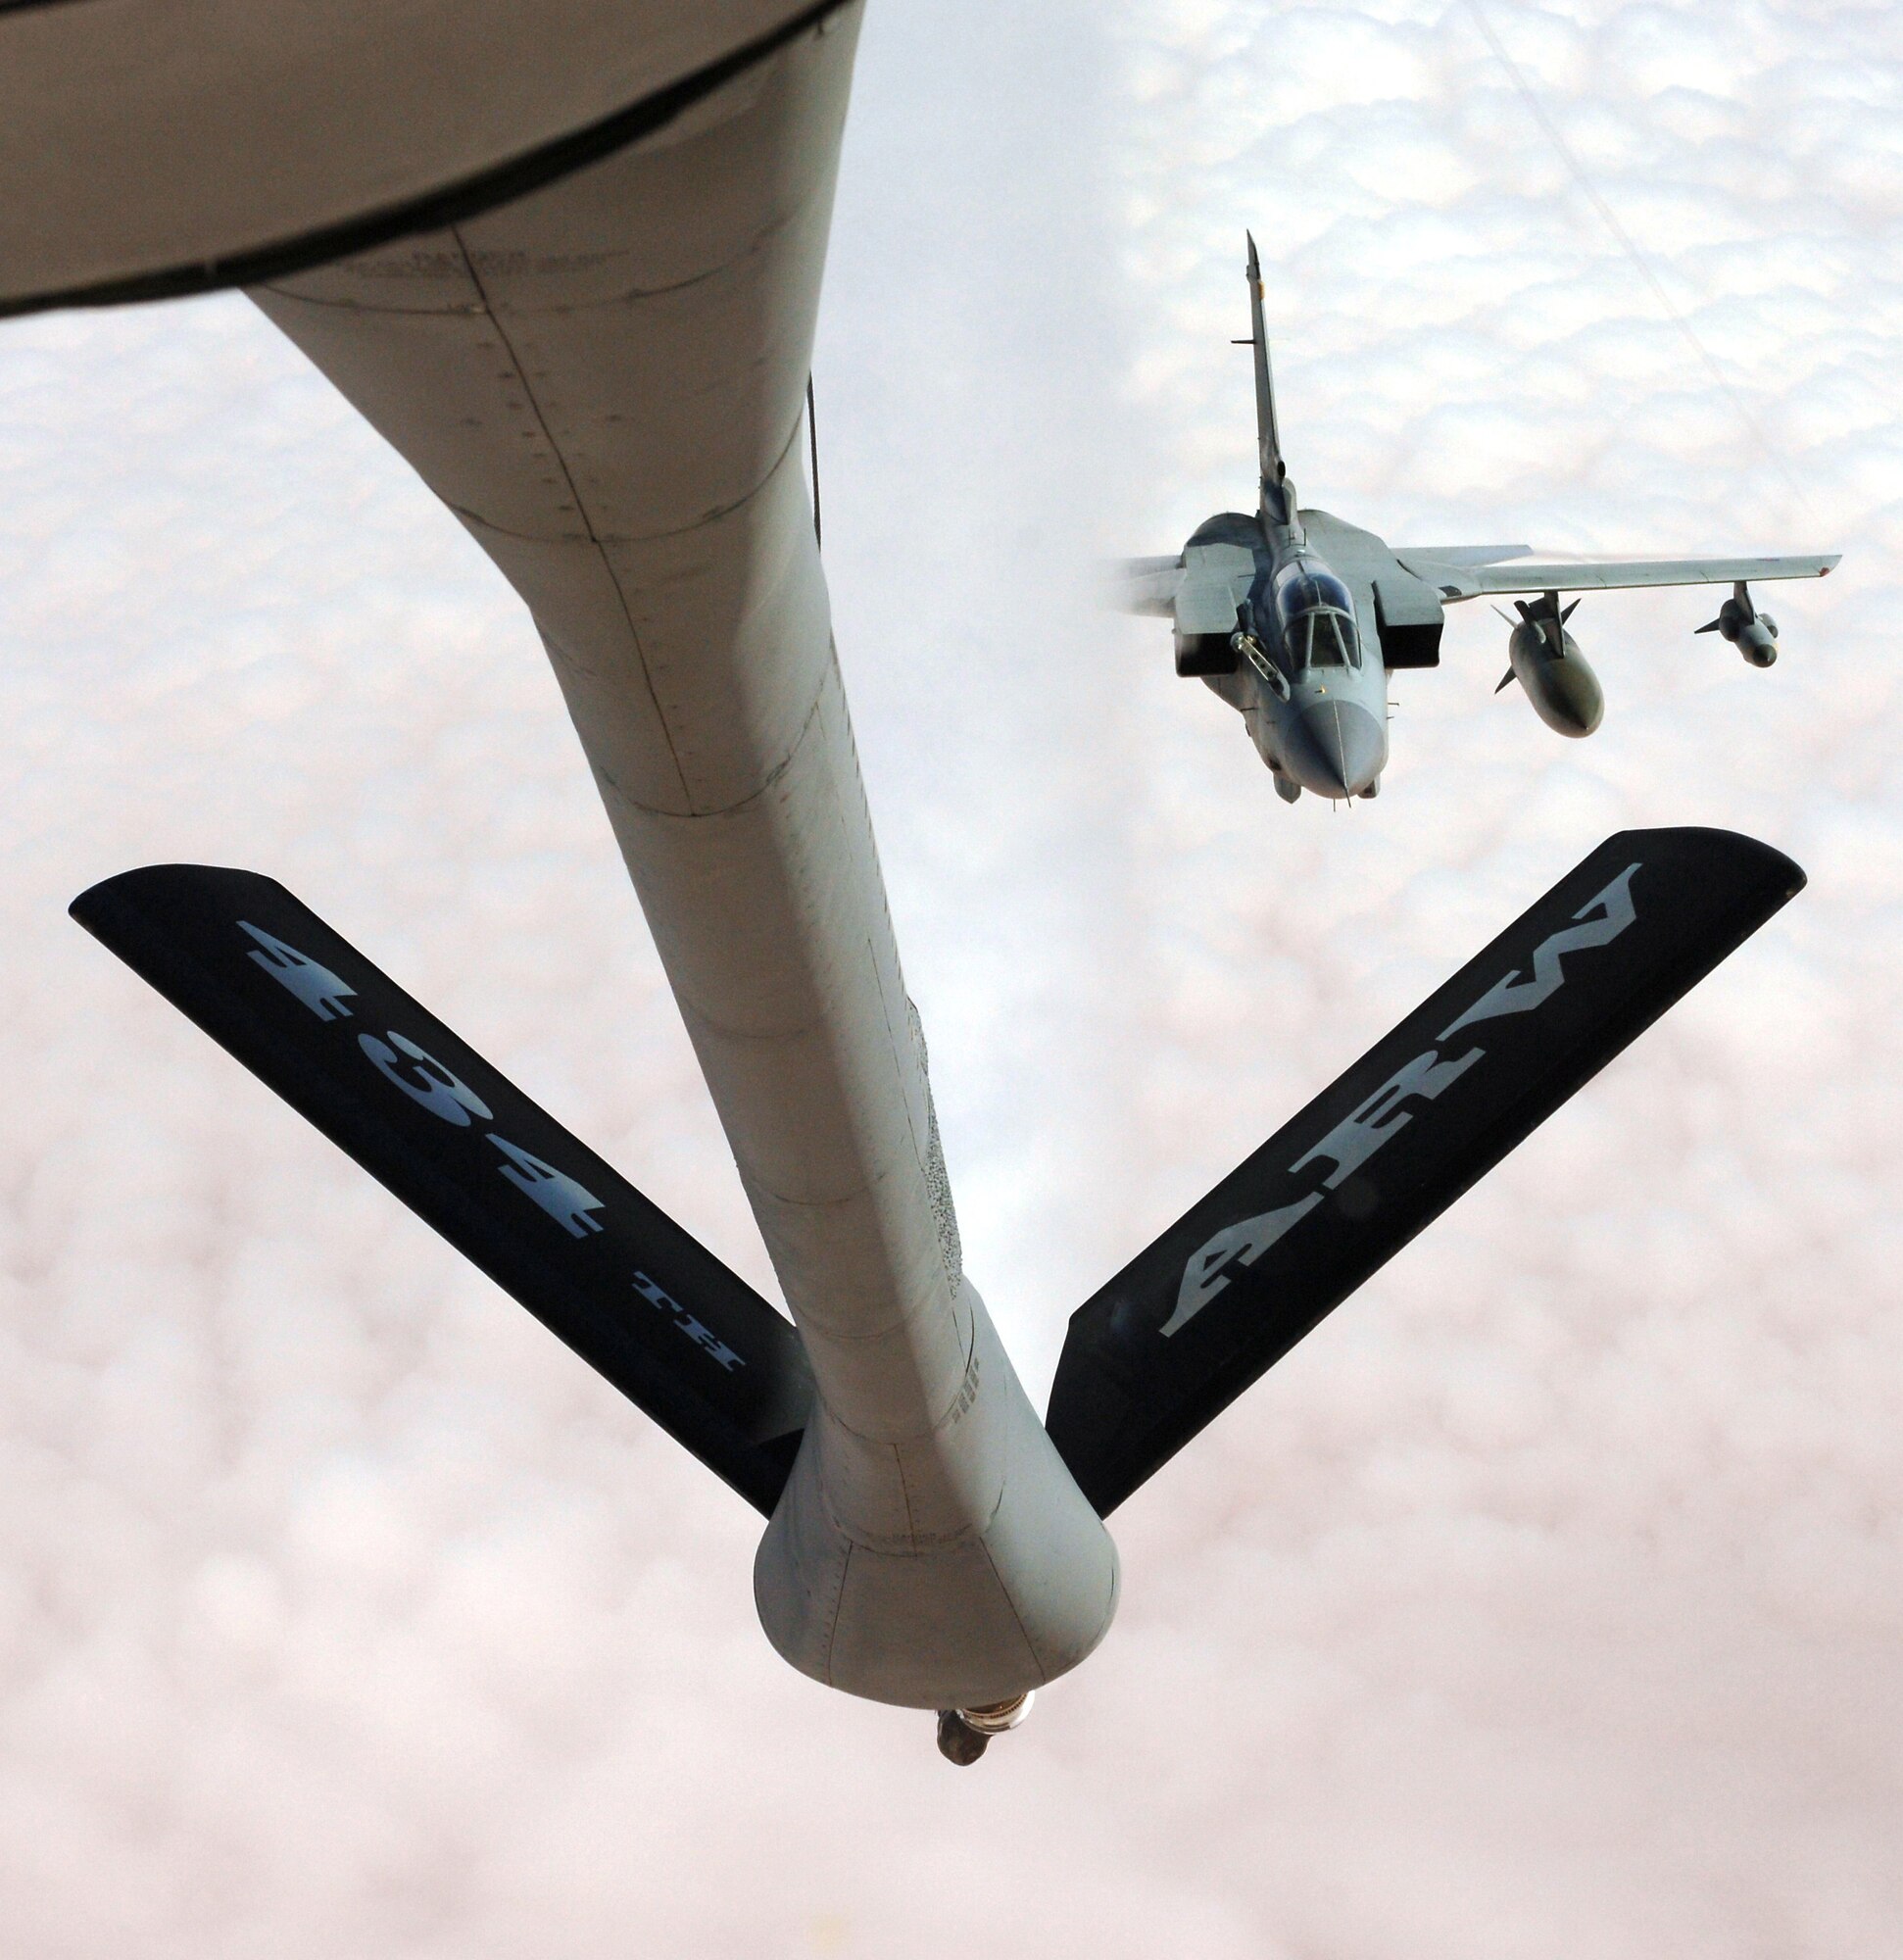 GRISSOM AIR RESERVE BASE, Ind., -- A Royal Air Force Tornado pops out from the contrails  of a Grissom KC-135 as it approaches for a refueling during exerxice Iron Falcon 0701 recently. (U.S. Air Force Photo/Master Sgt. Mike Morgan)